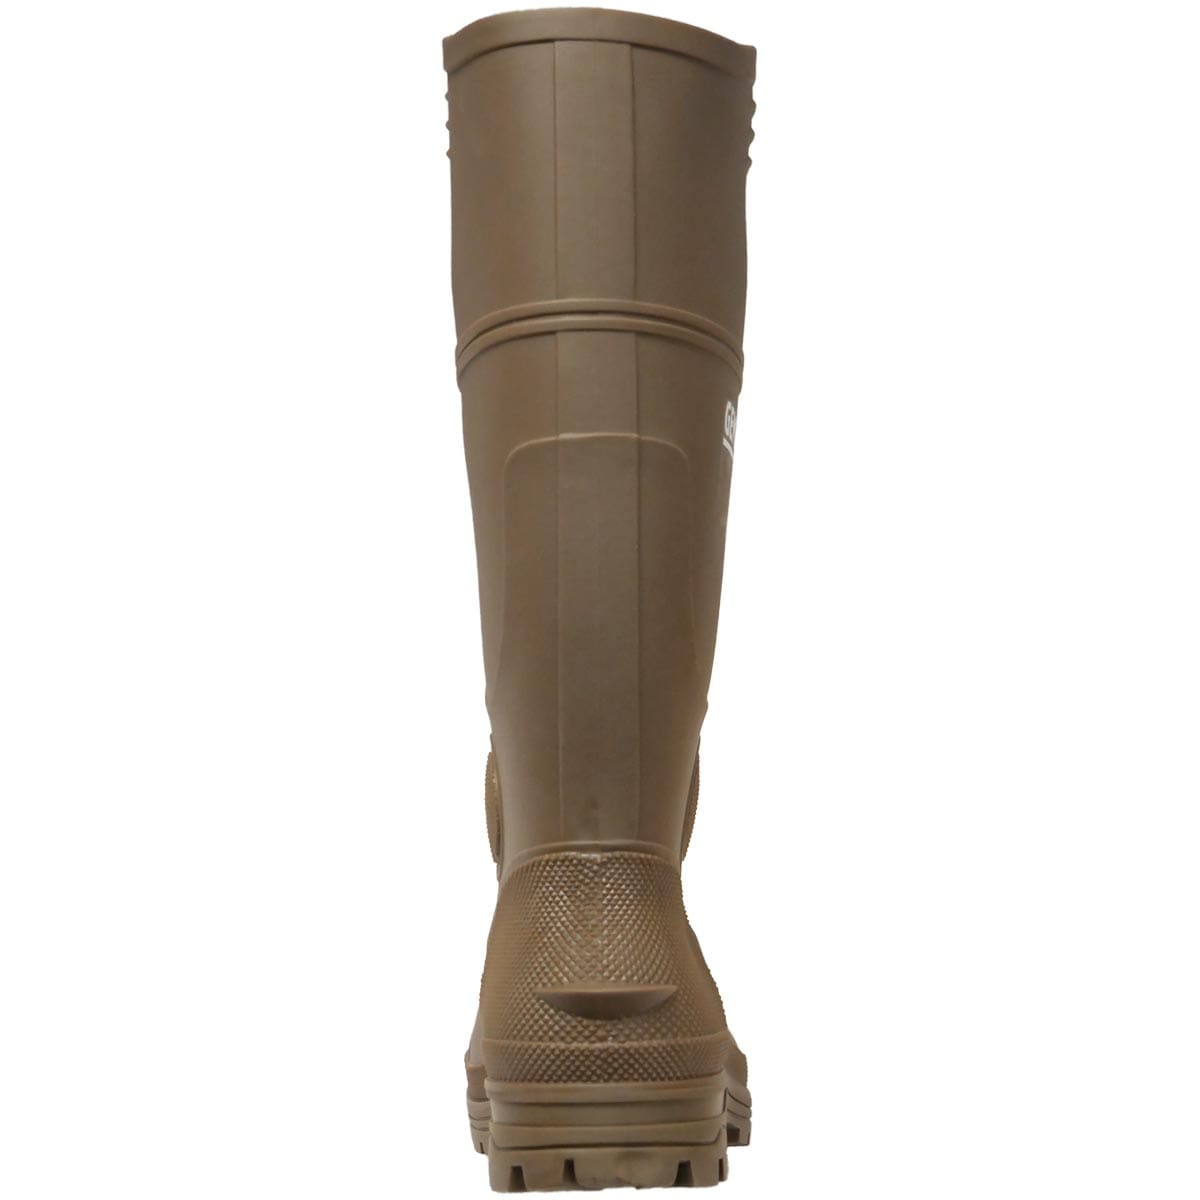 Gemplers Brown Bear Composite Toe Chore Boots